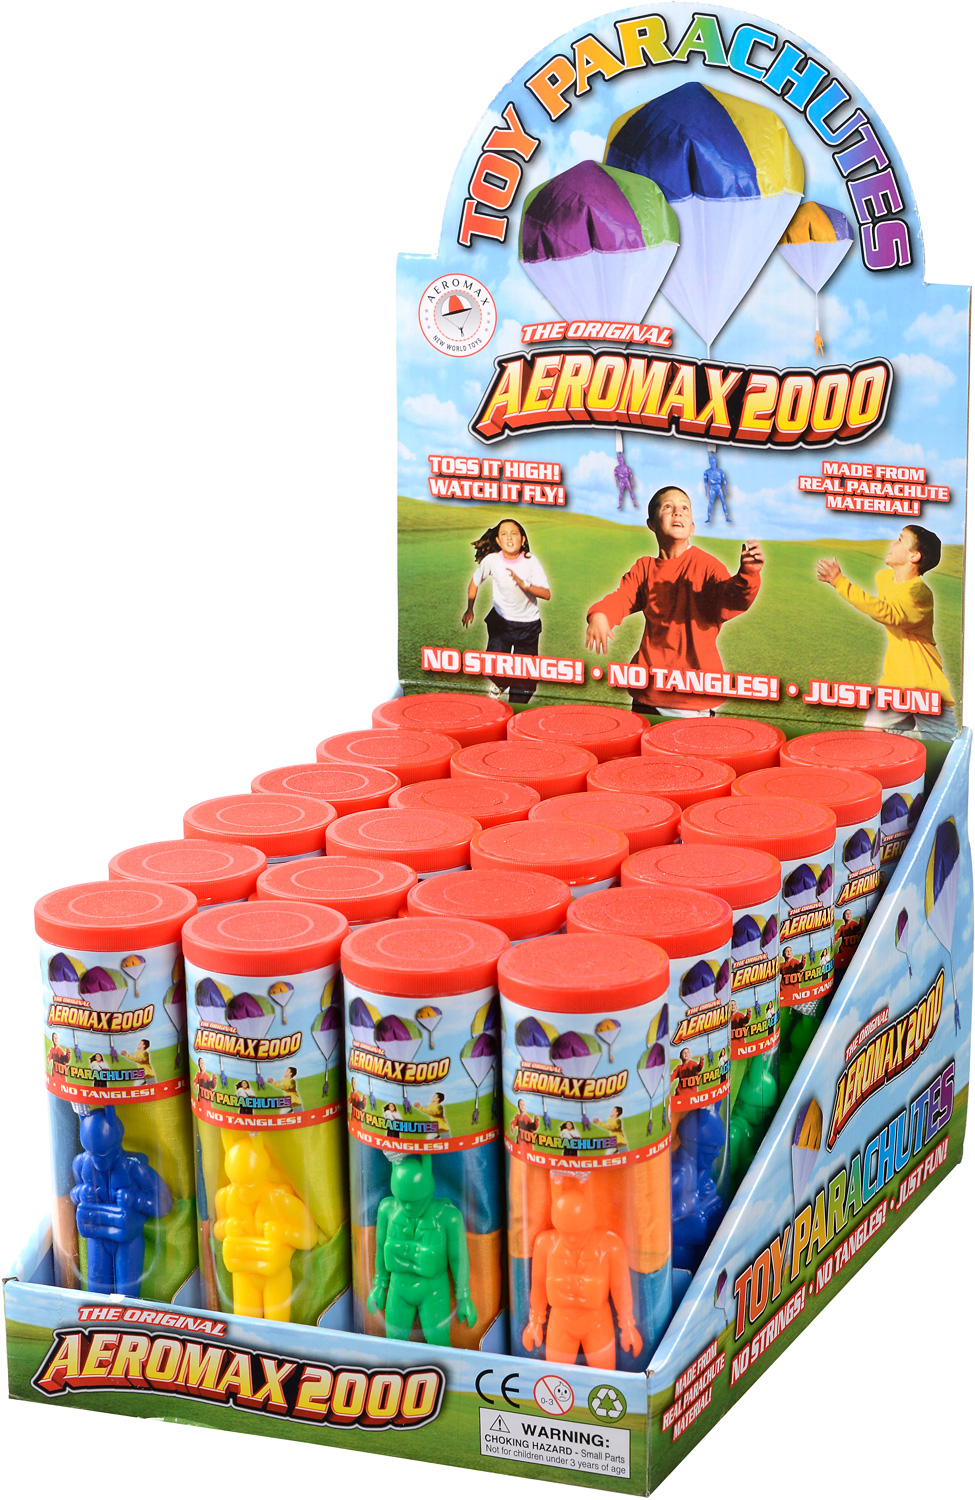 Aeromax 2000 Original Toy Parachute Tangle With No Strings for sale online 